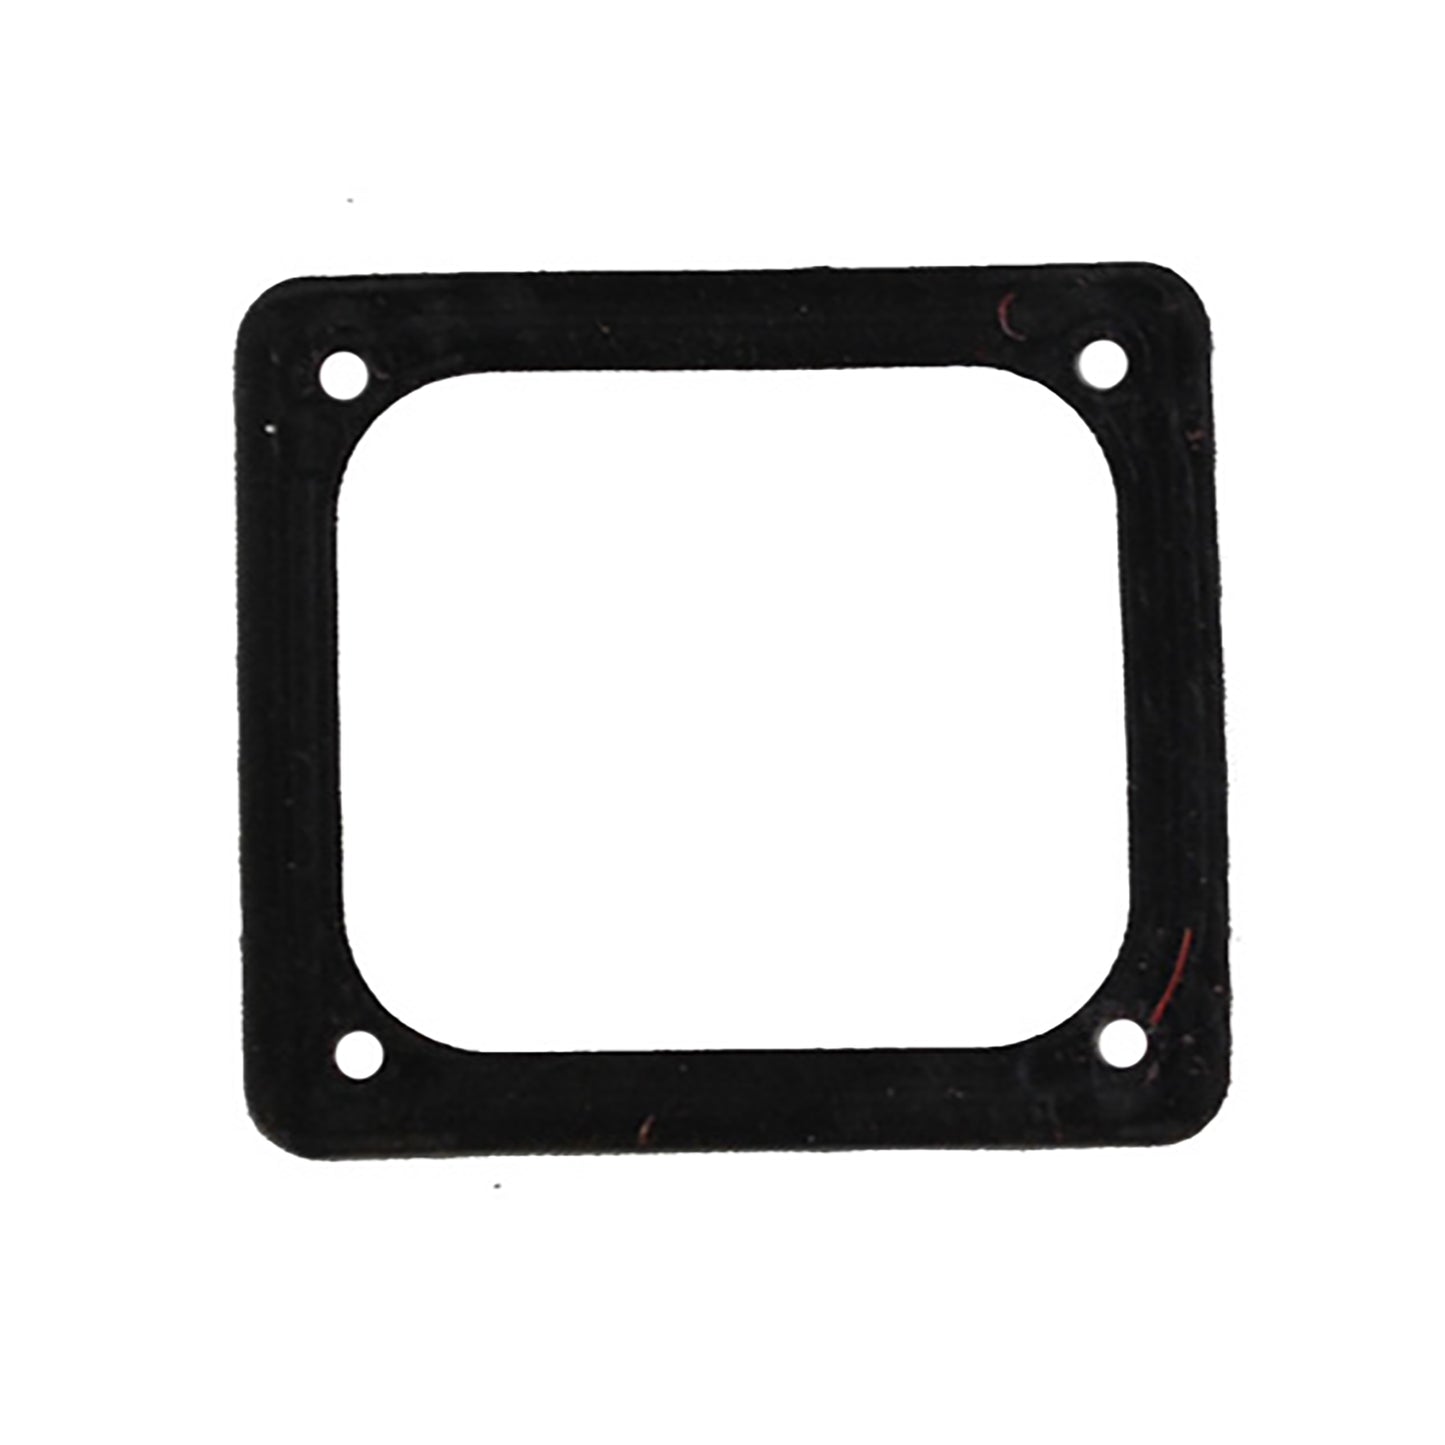 Switch Box Rubber Seal for BR-252A Inflatable Blower